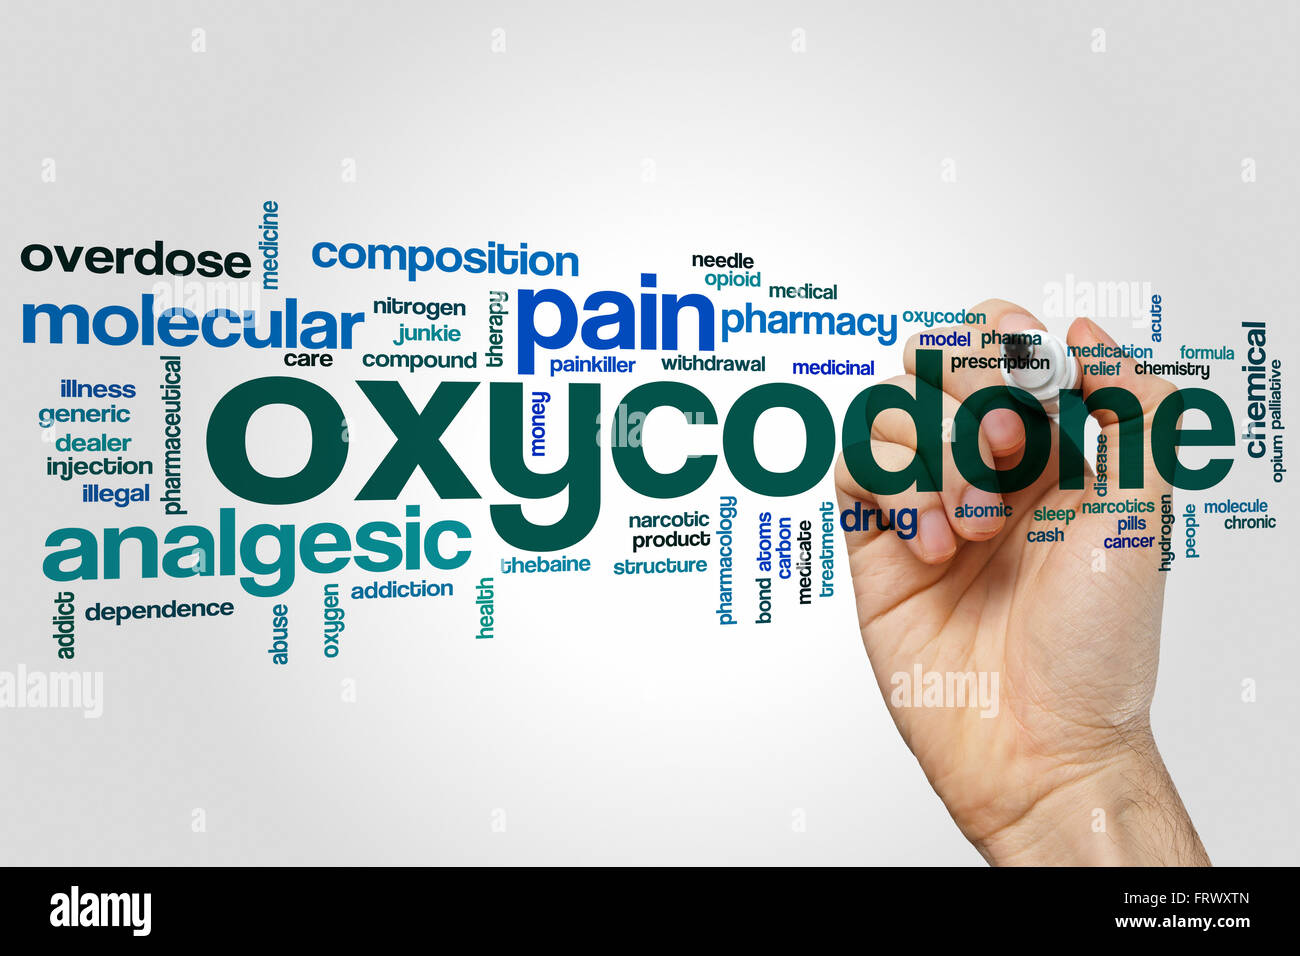 Oxycodone word cloud concept with analgesic pain related tags Stock Photo